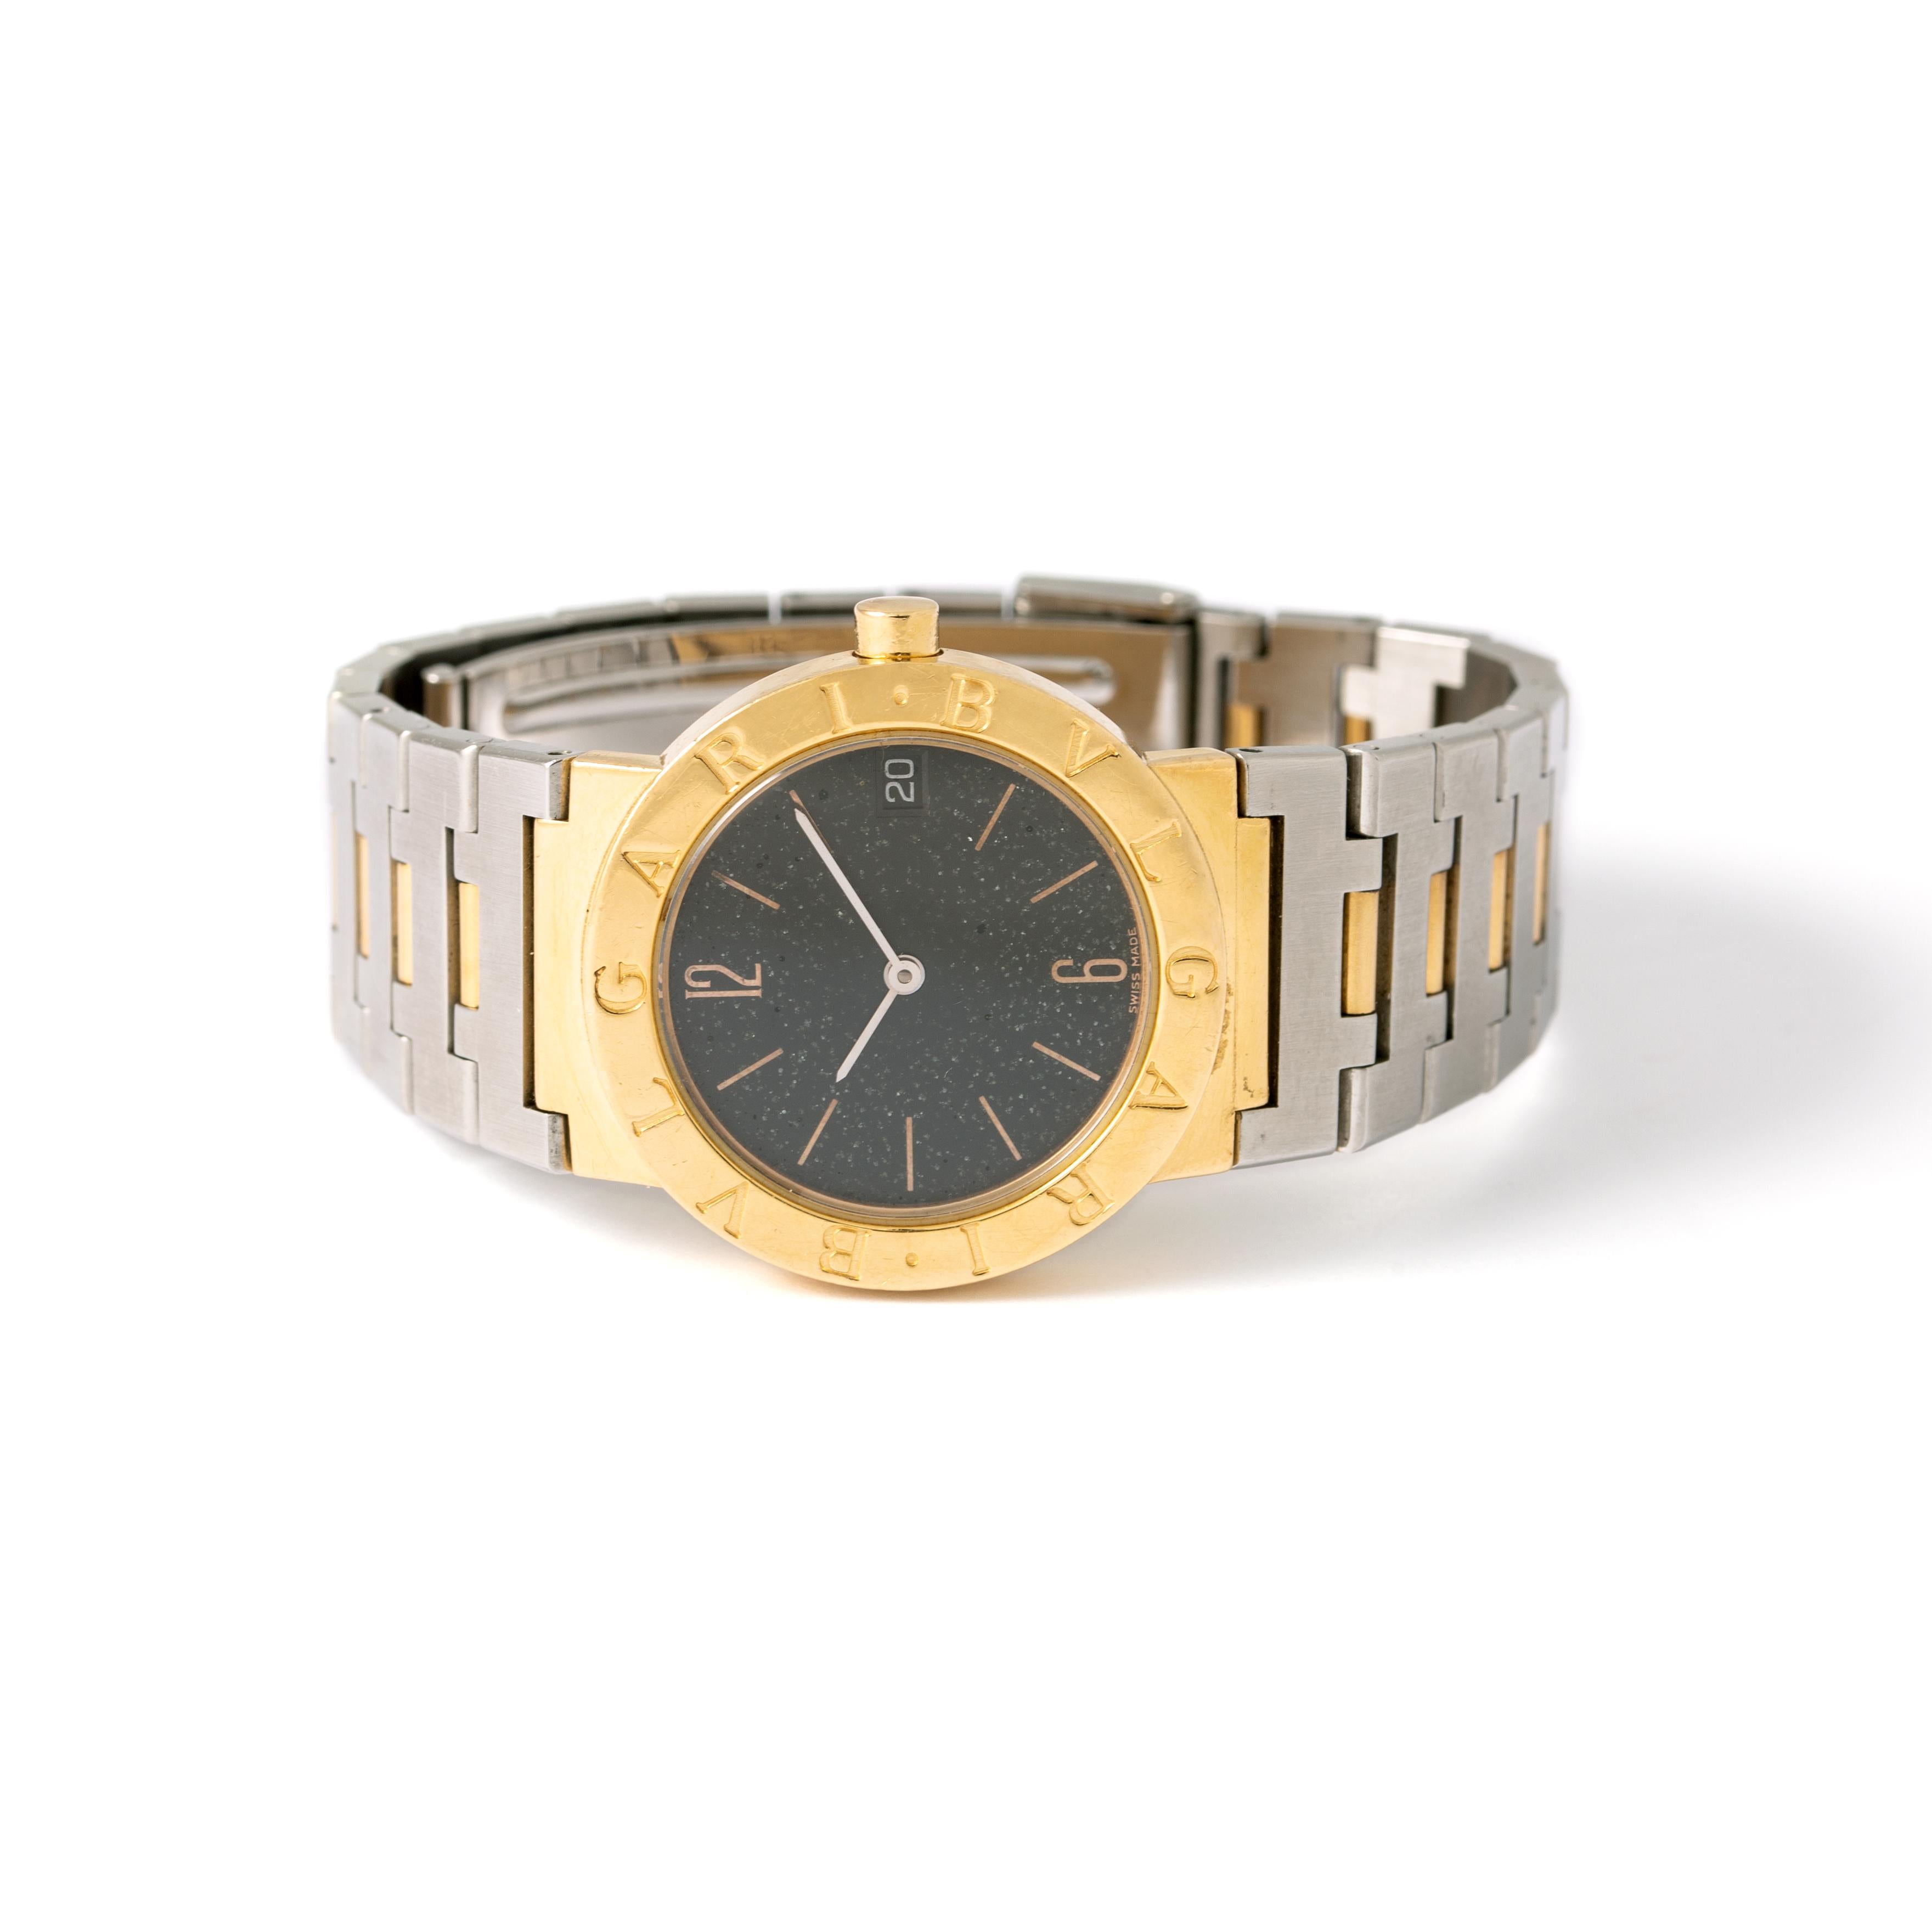 Bulgari Bulgari BB 30 GSD Stainless Steel & 18K Yellow Gold
Bvlgari Stainless Steel & 18K Yellow Gold ladies wristwatch. 
Black dial, Arabic numeral hour markers, date display at 3 o’clock, an 18K Yellow Gold 30mm case, winder and bezel, a Stainless